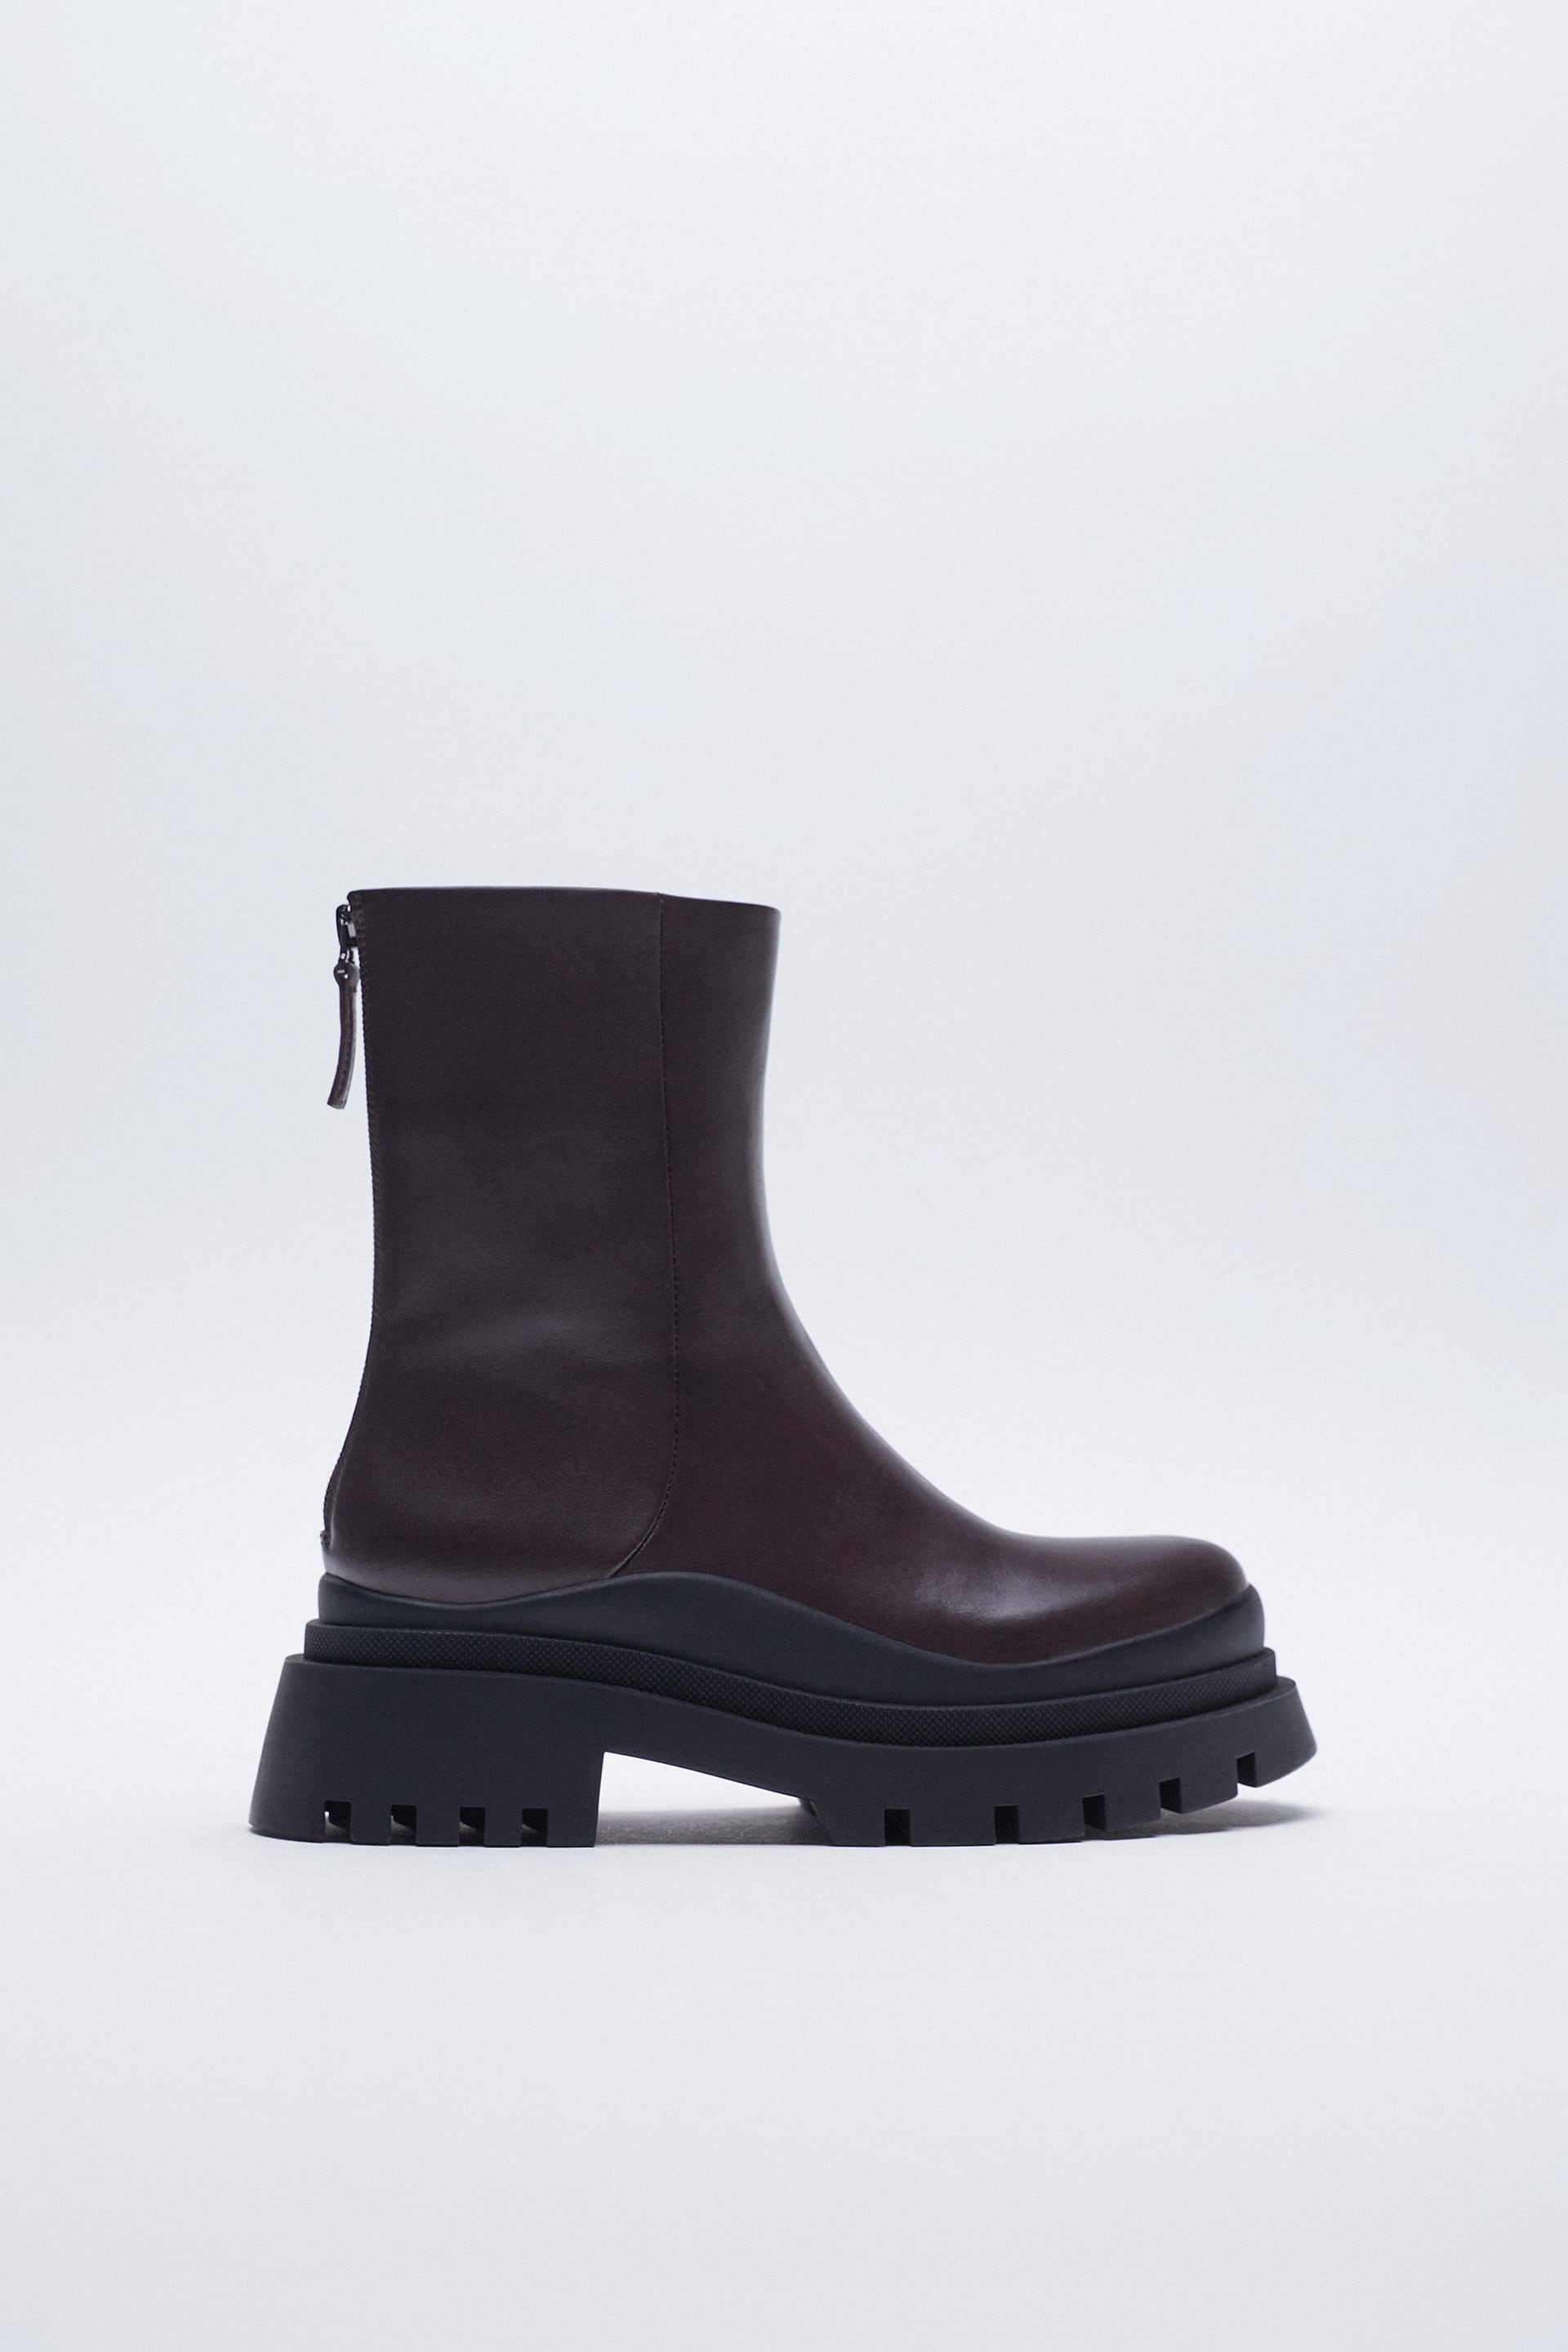 The 30 Best Winter Boots at Zara | Who 